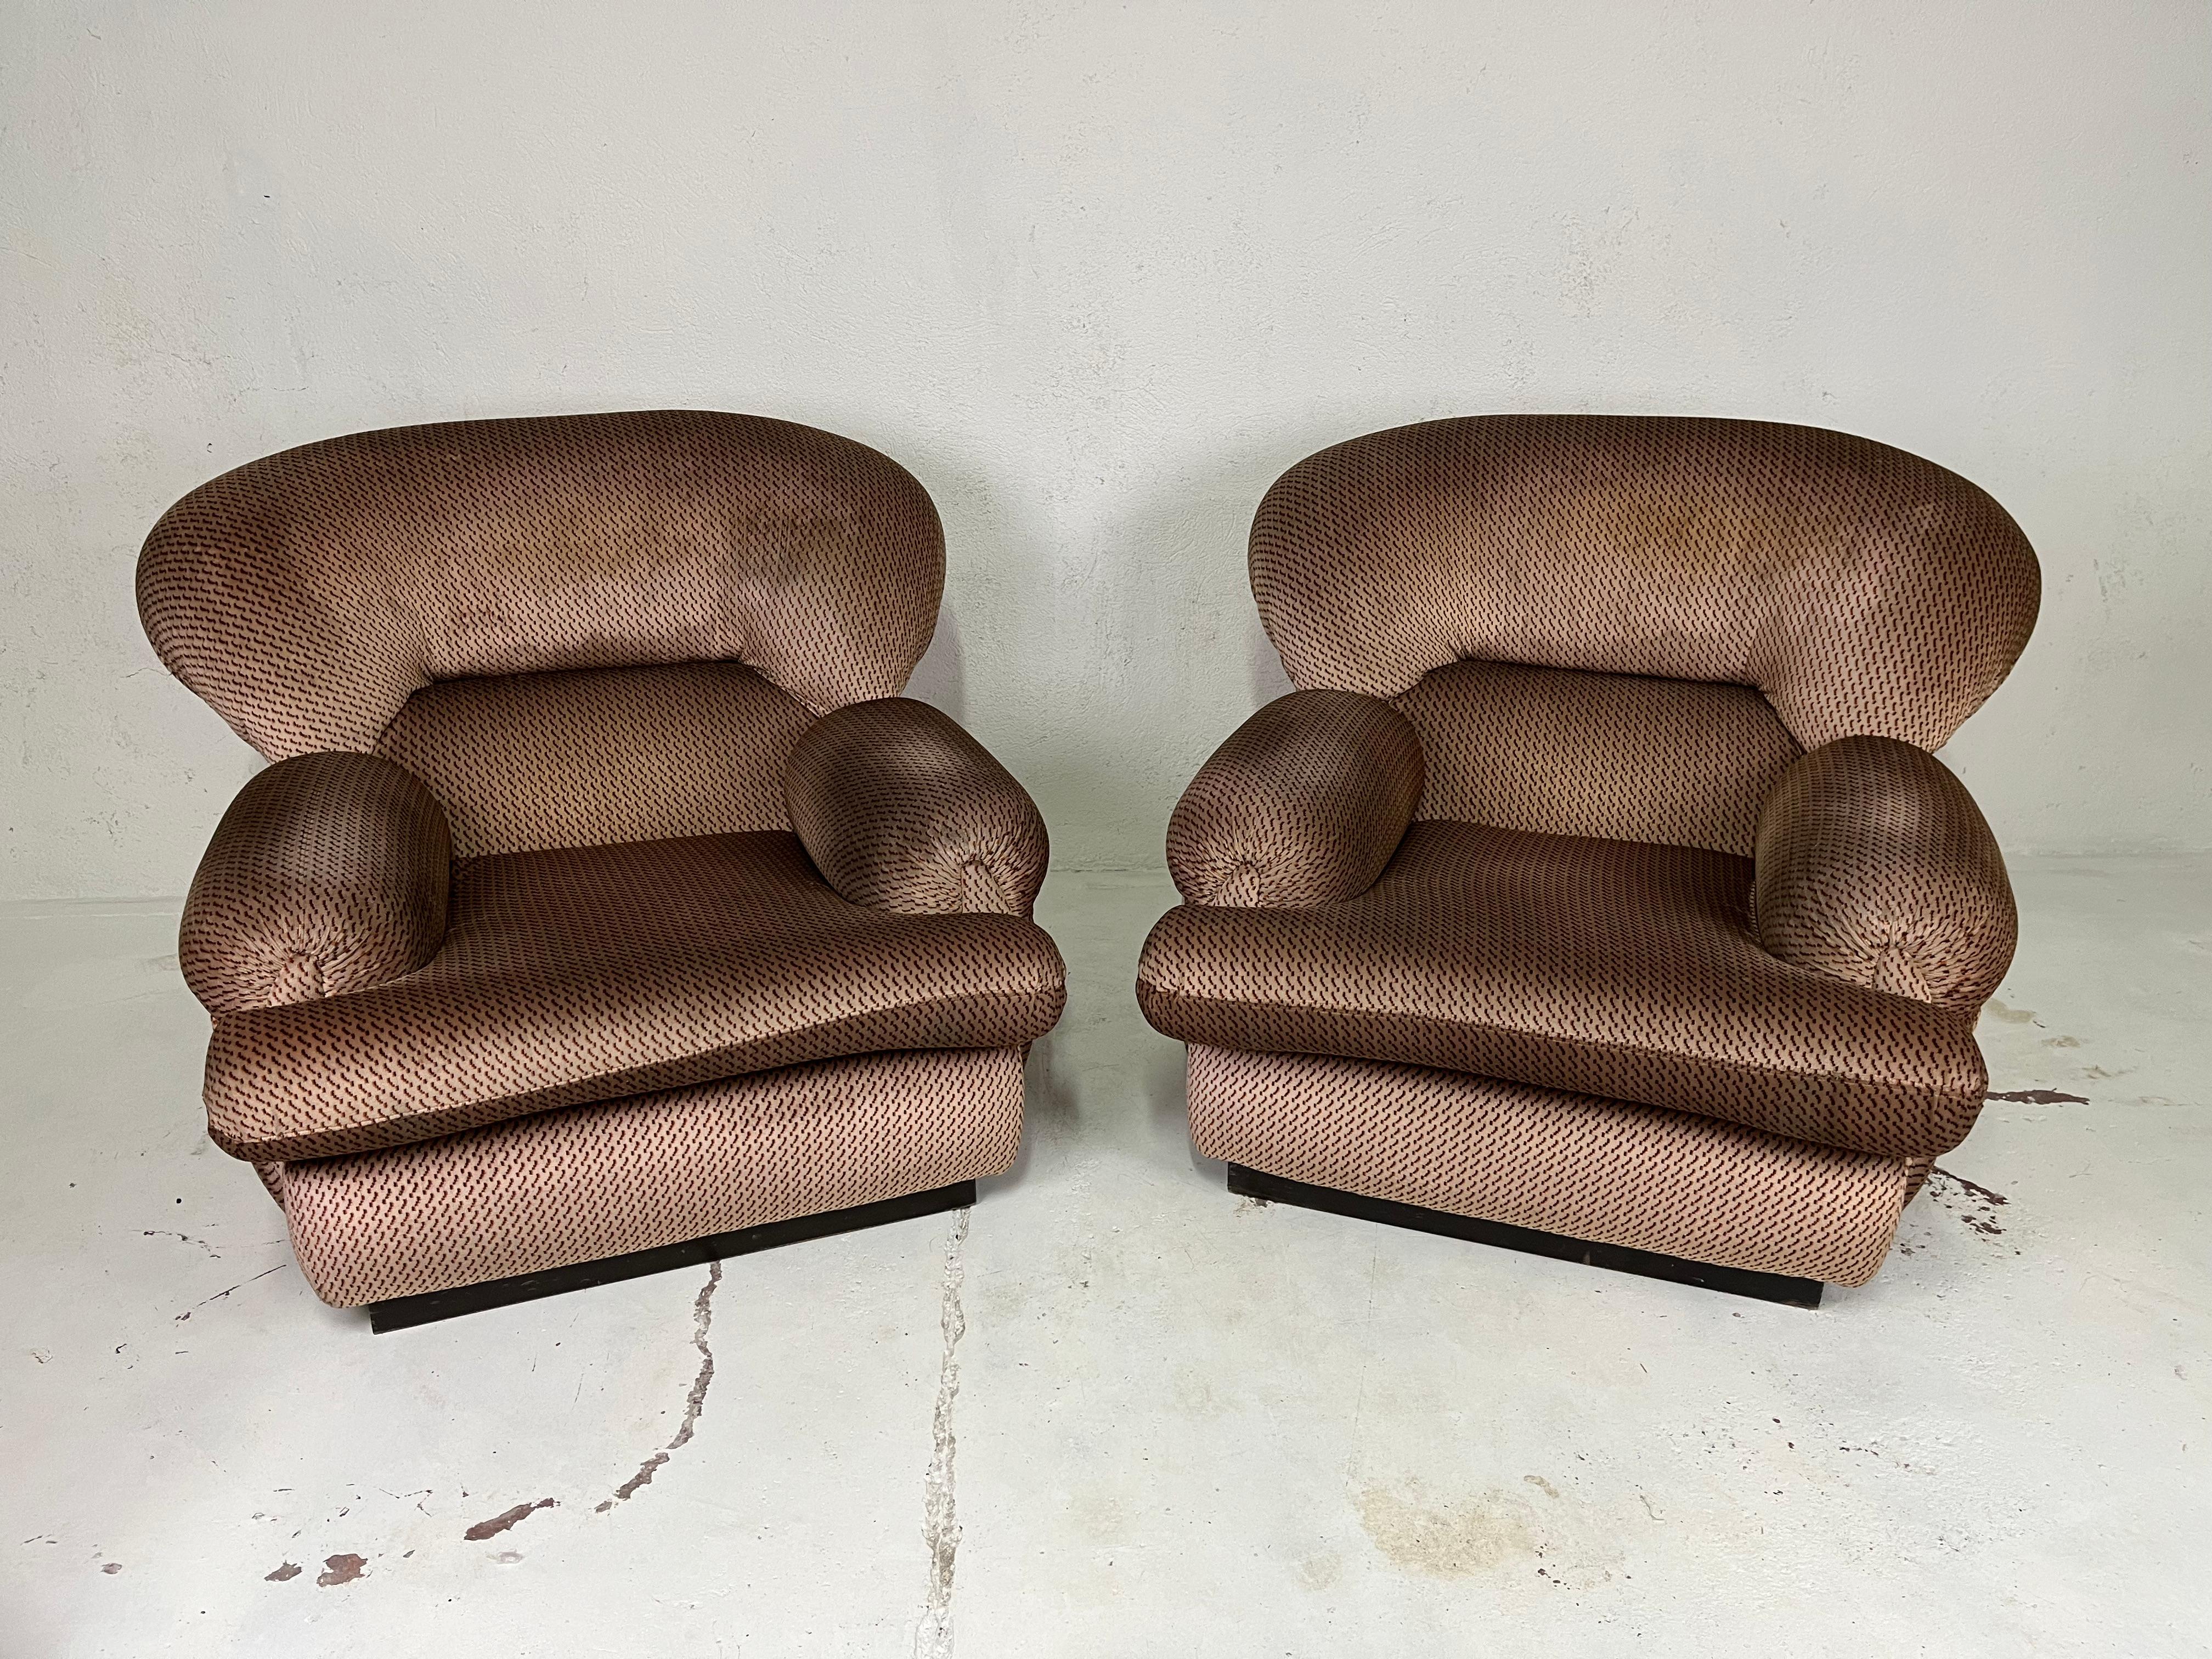 Pair of armchairs with black painted wooden frame, large upholstery covered with fabric typical of the space age period, made in Italy in the 1960s.

The chairs have been thoroughly cleaned, are in perfect condition, the fabric is intact, and the